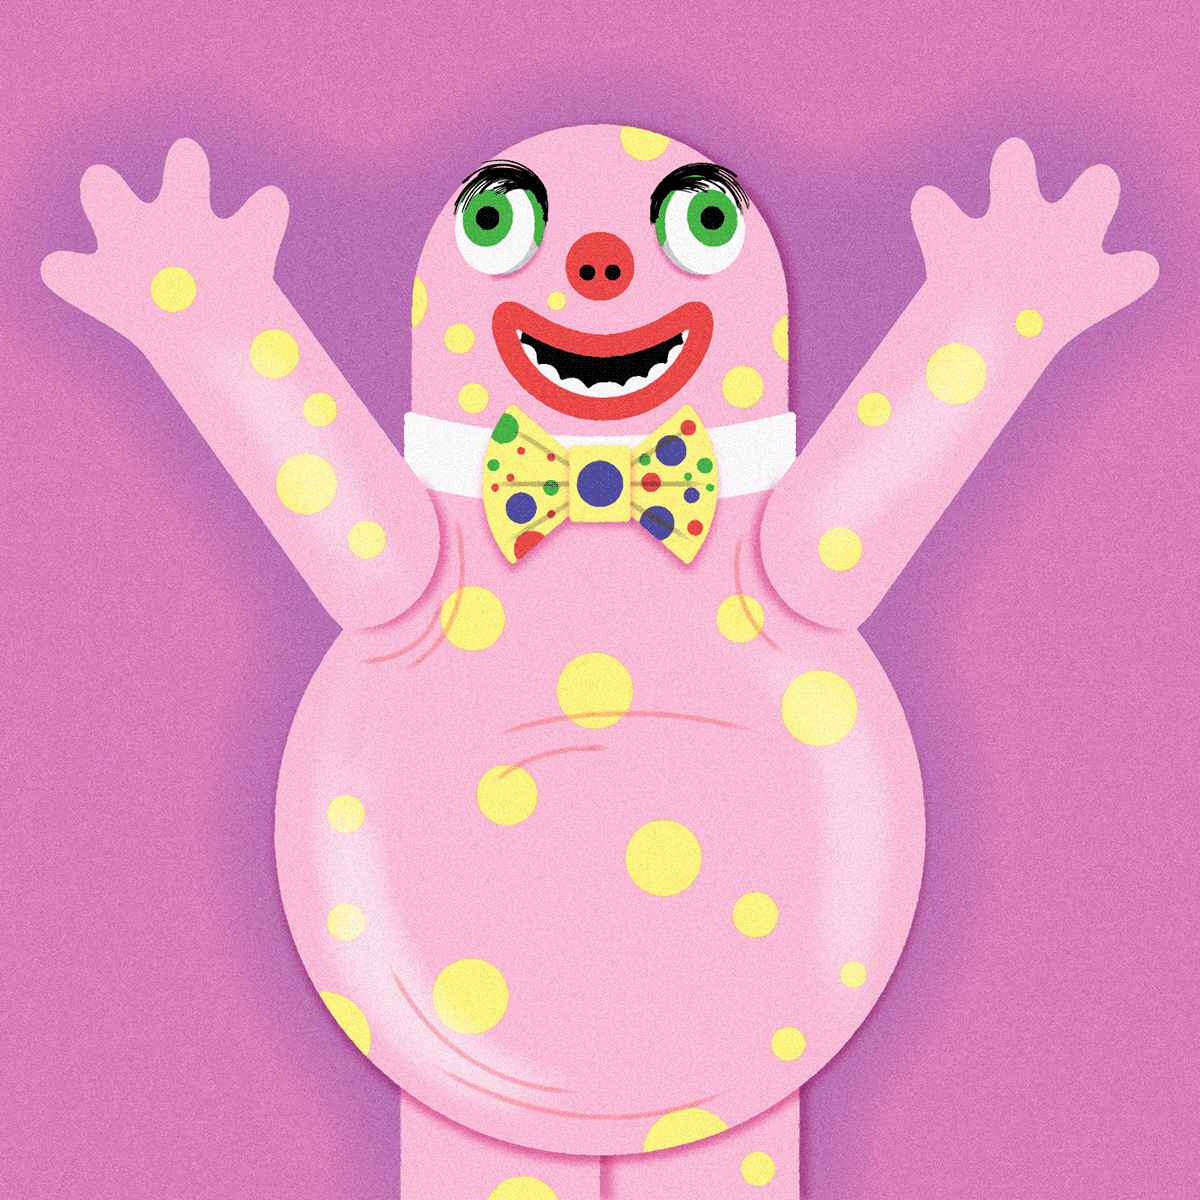 Illustration of a big pink blobby, smiling monster with yellow spots and wearing a bowtie